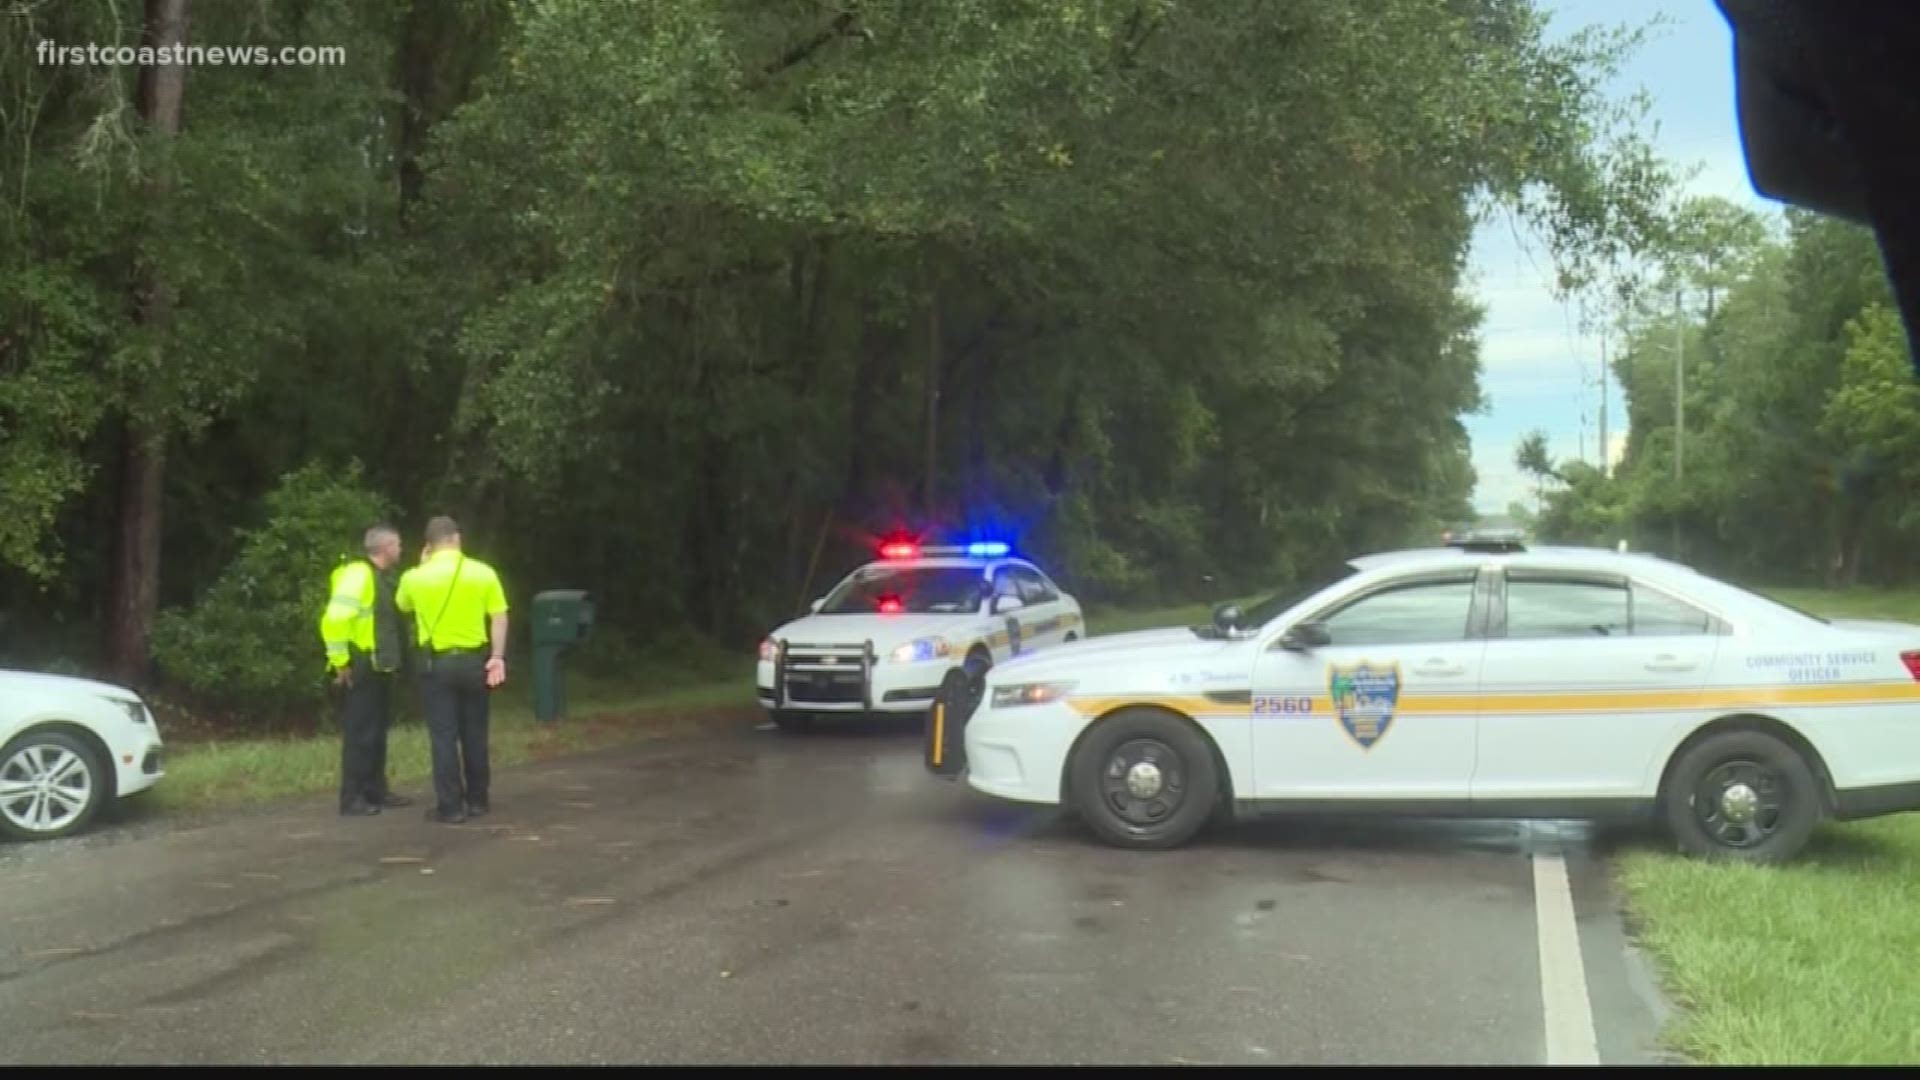 A man was found dead on the side of a road in Northwest Jacksonville on Tuesday, according to the Jacksonville Sheriff's Office.